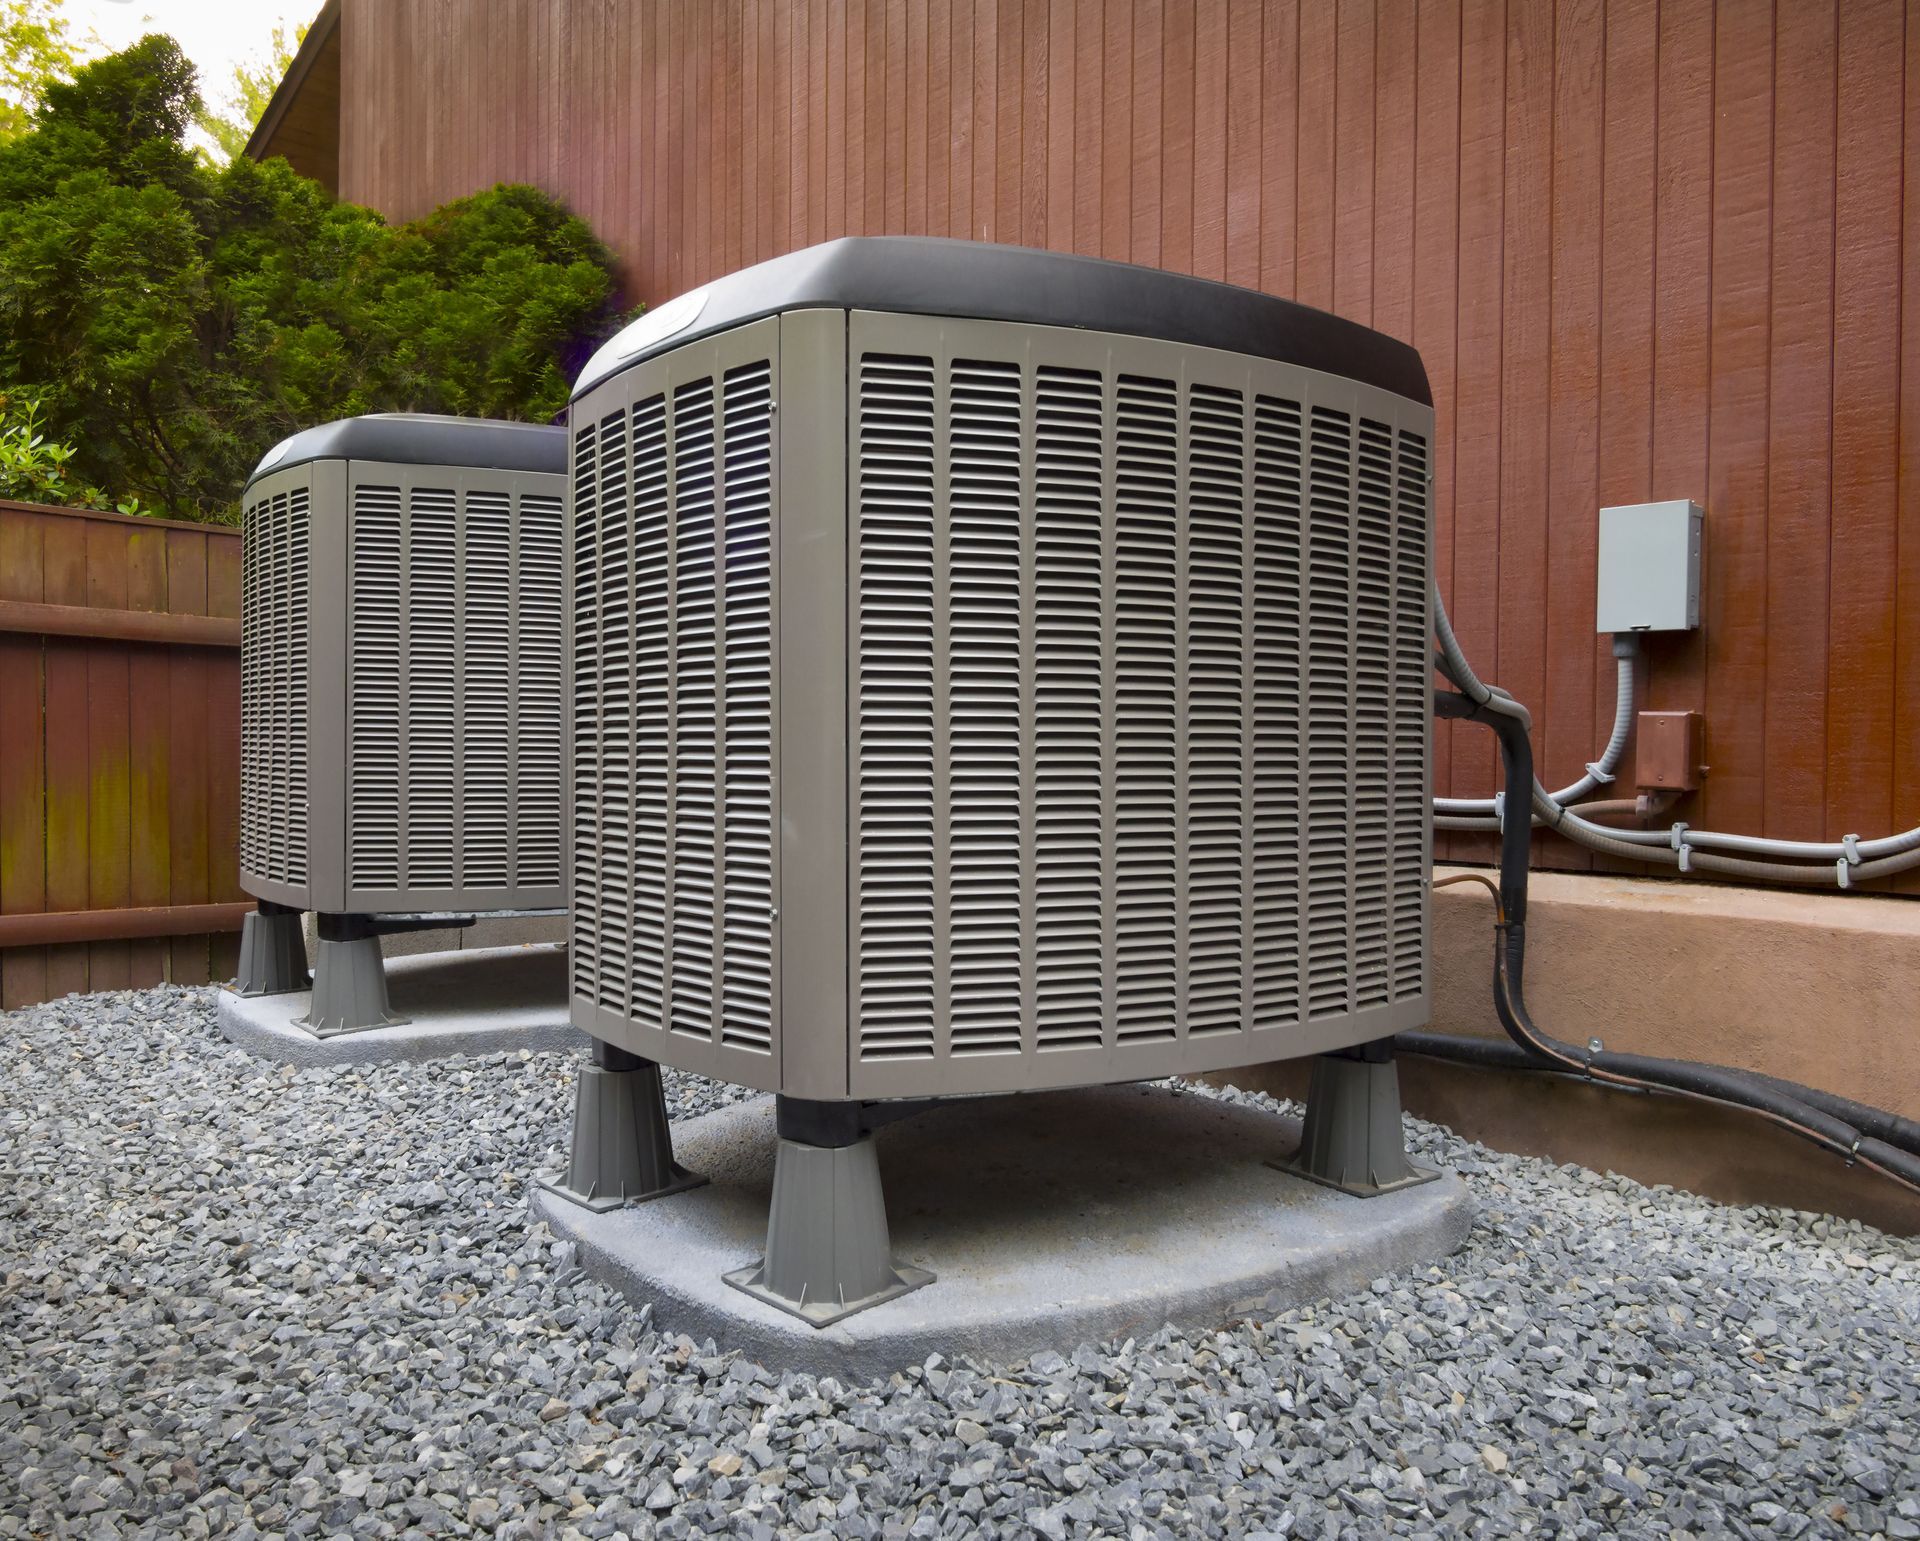 Newly Installed Heat Pumps